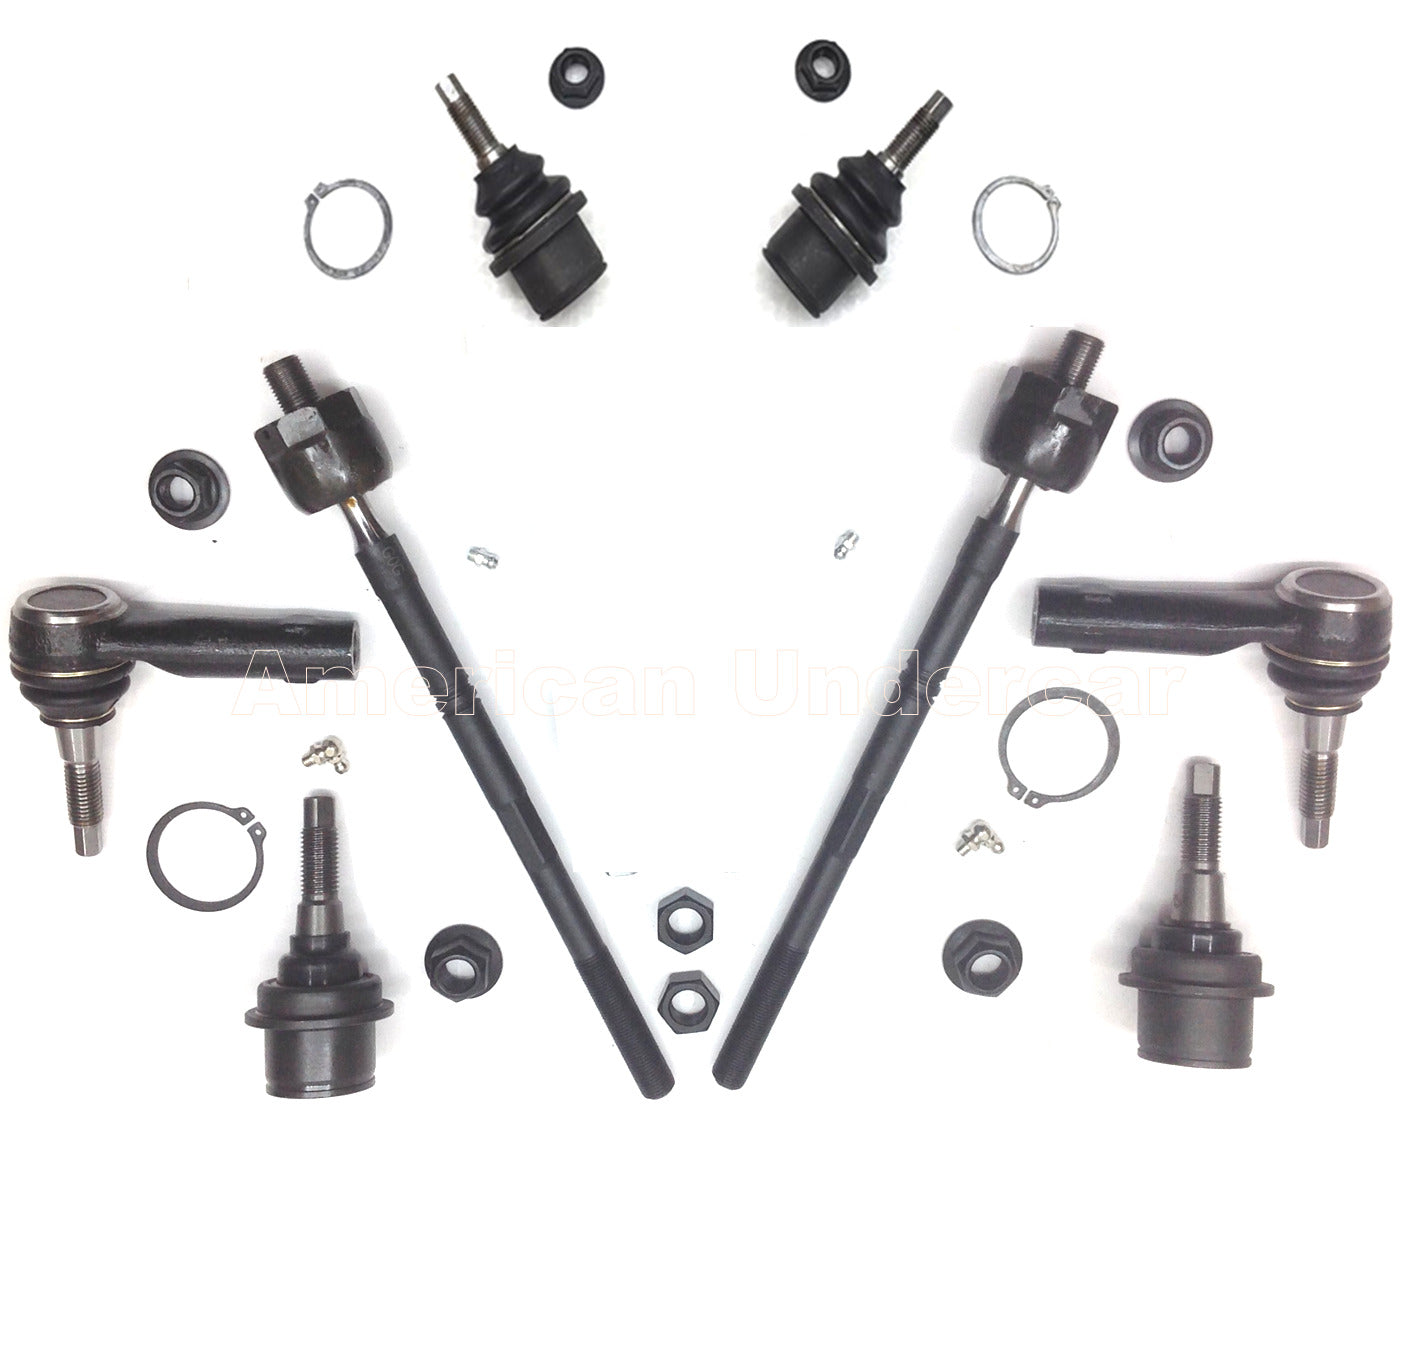 HD Ball Joints Tie Rod Steering Suspension Kit for 2018-2021 Ford Expedition 4x4